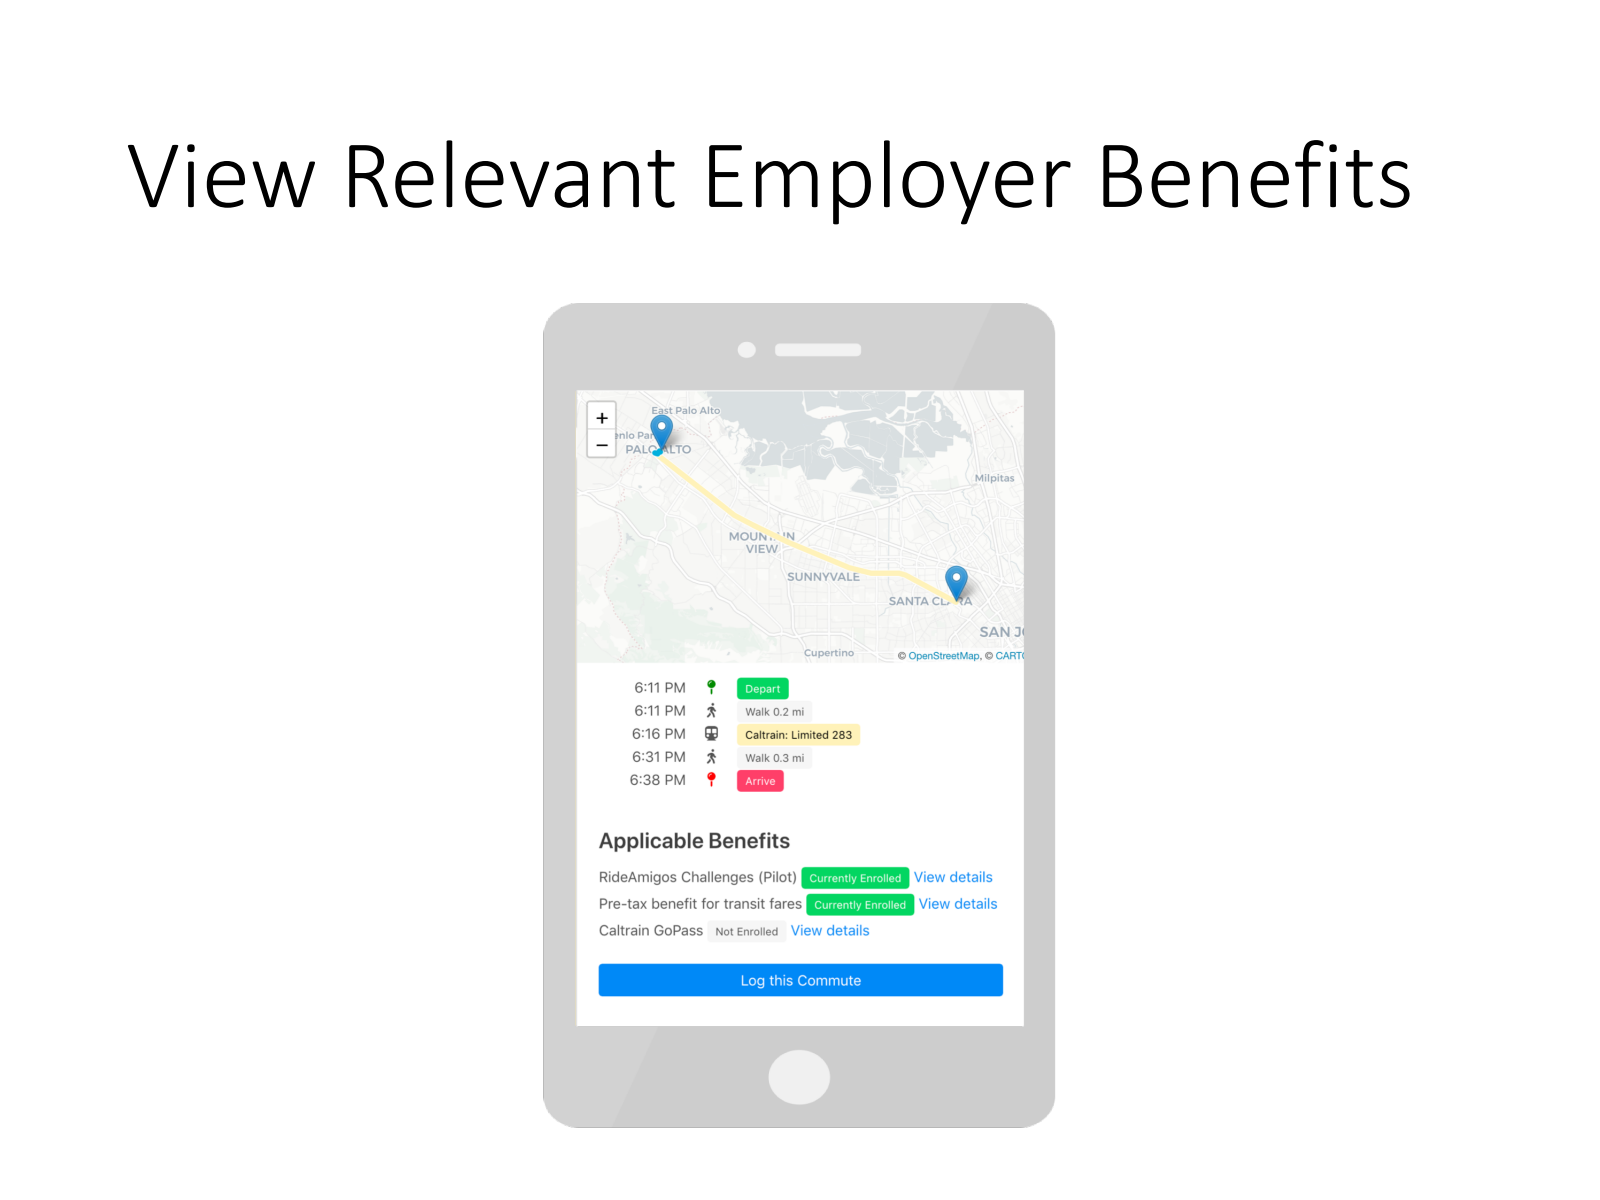 View relevant employer benefits using Commuter Wallet